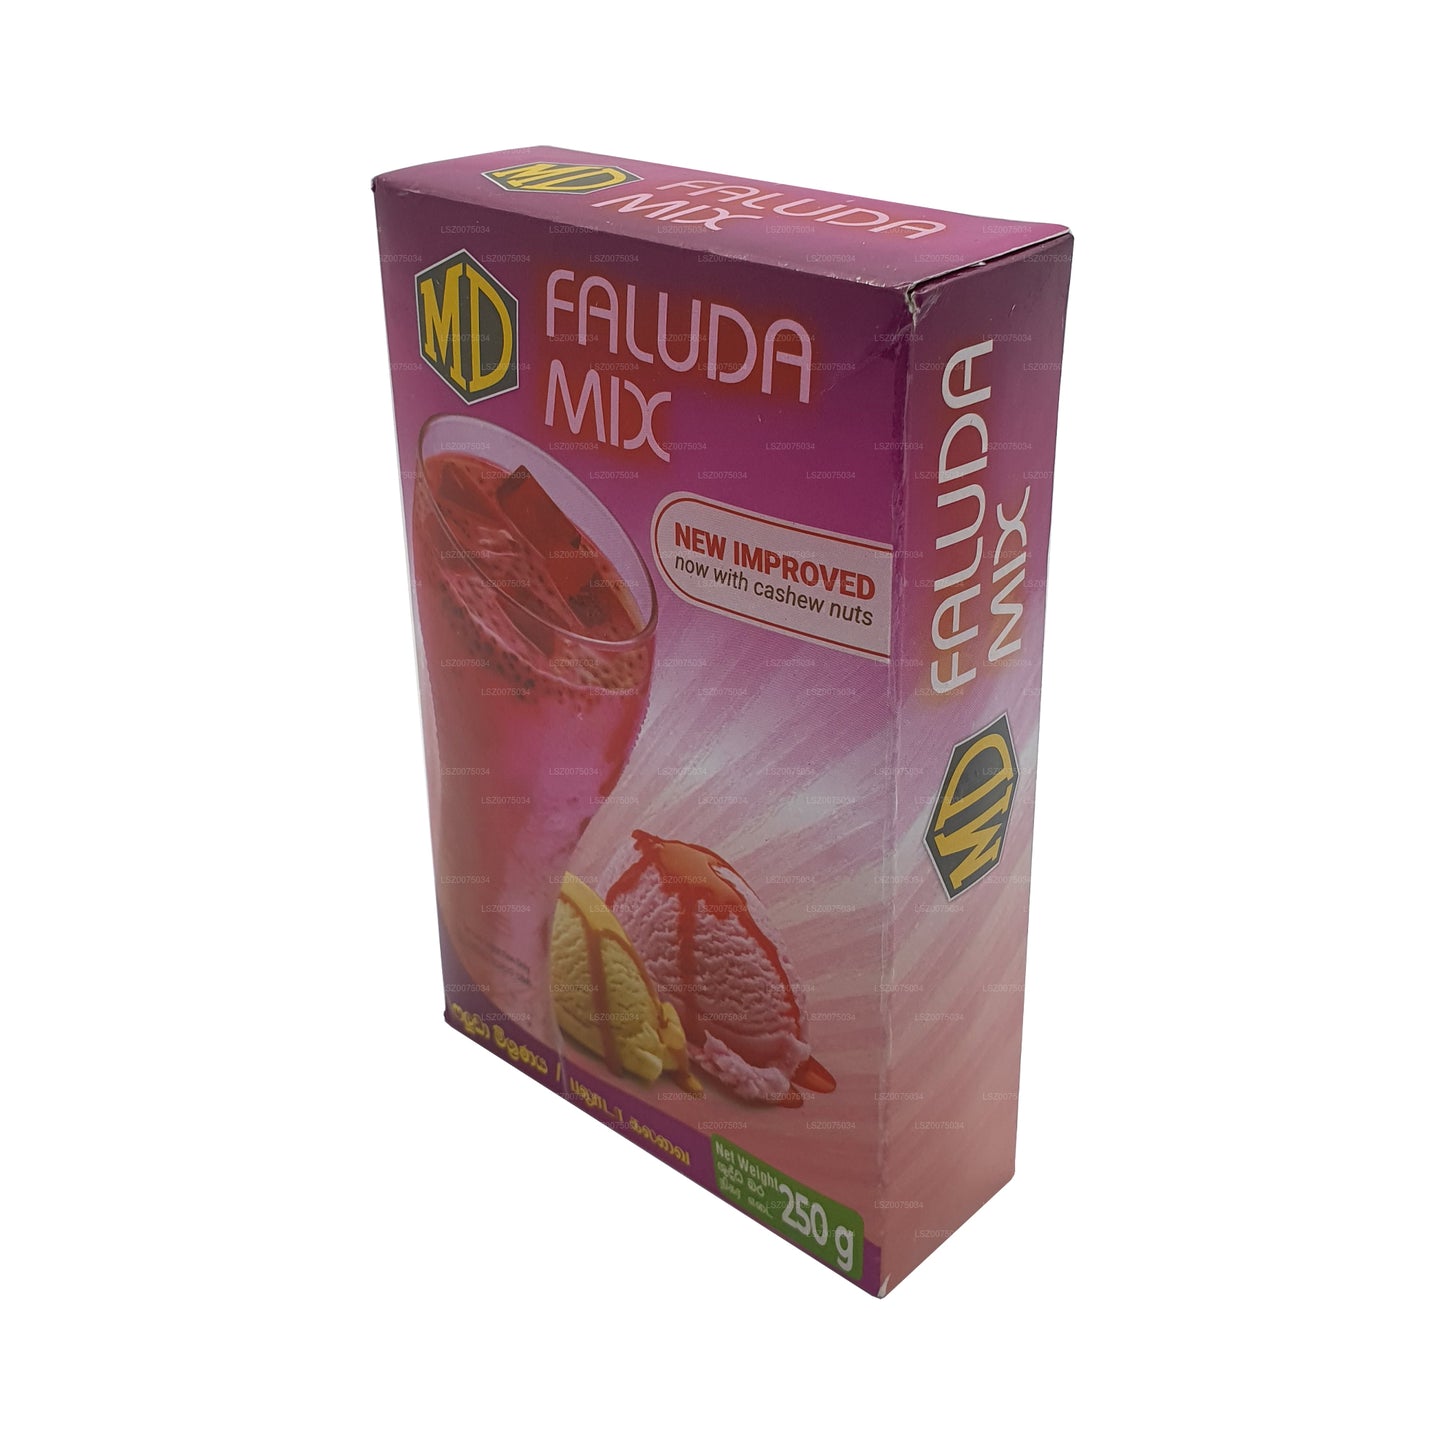 MD Instant Faluda Mix (250 g)